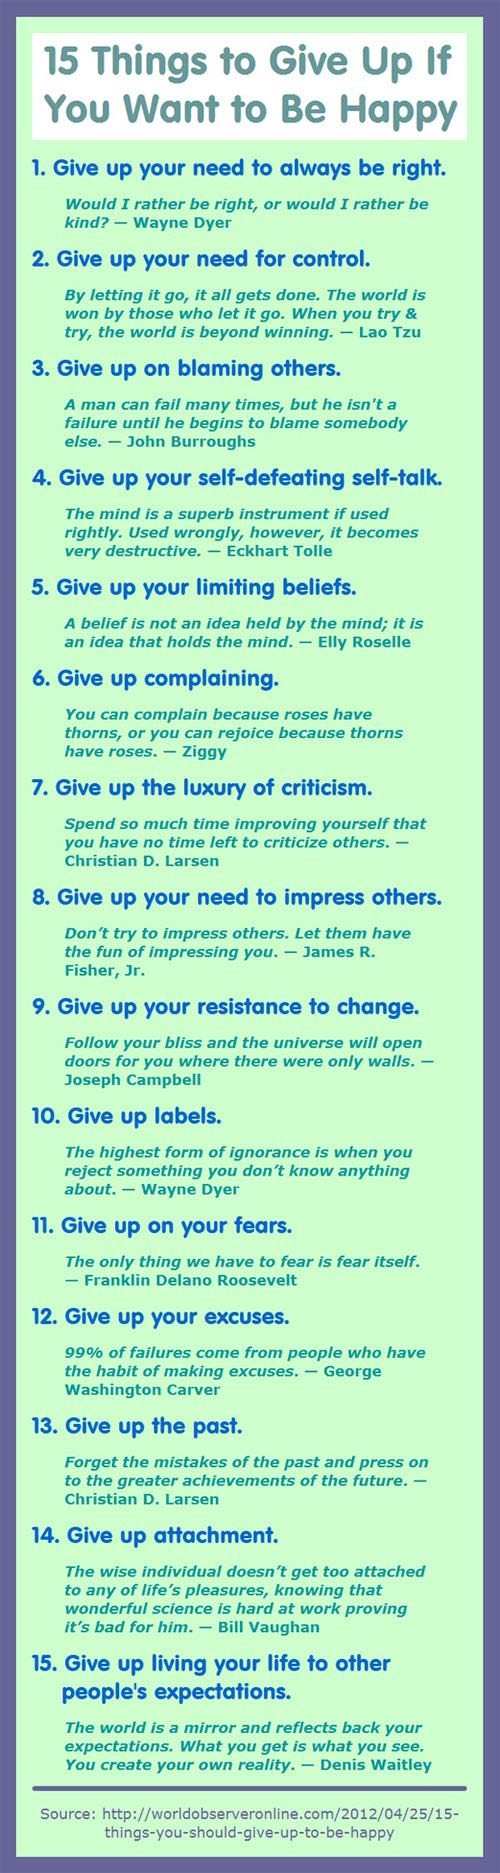 Things to give up if you want to be happy…